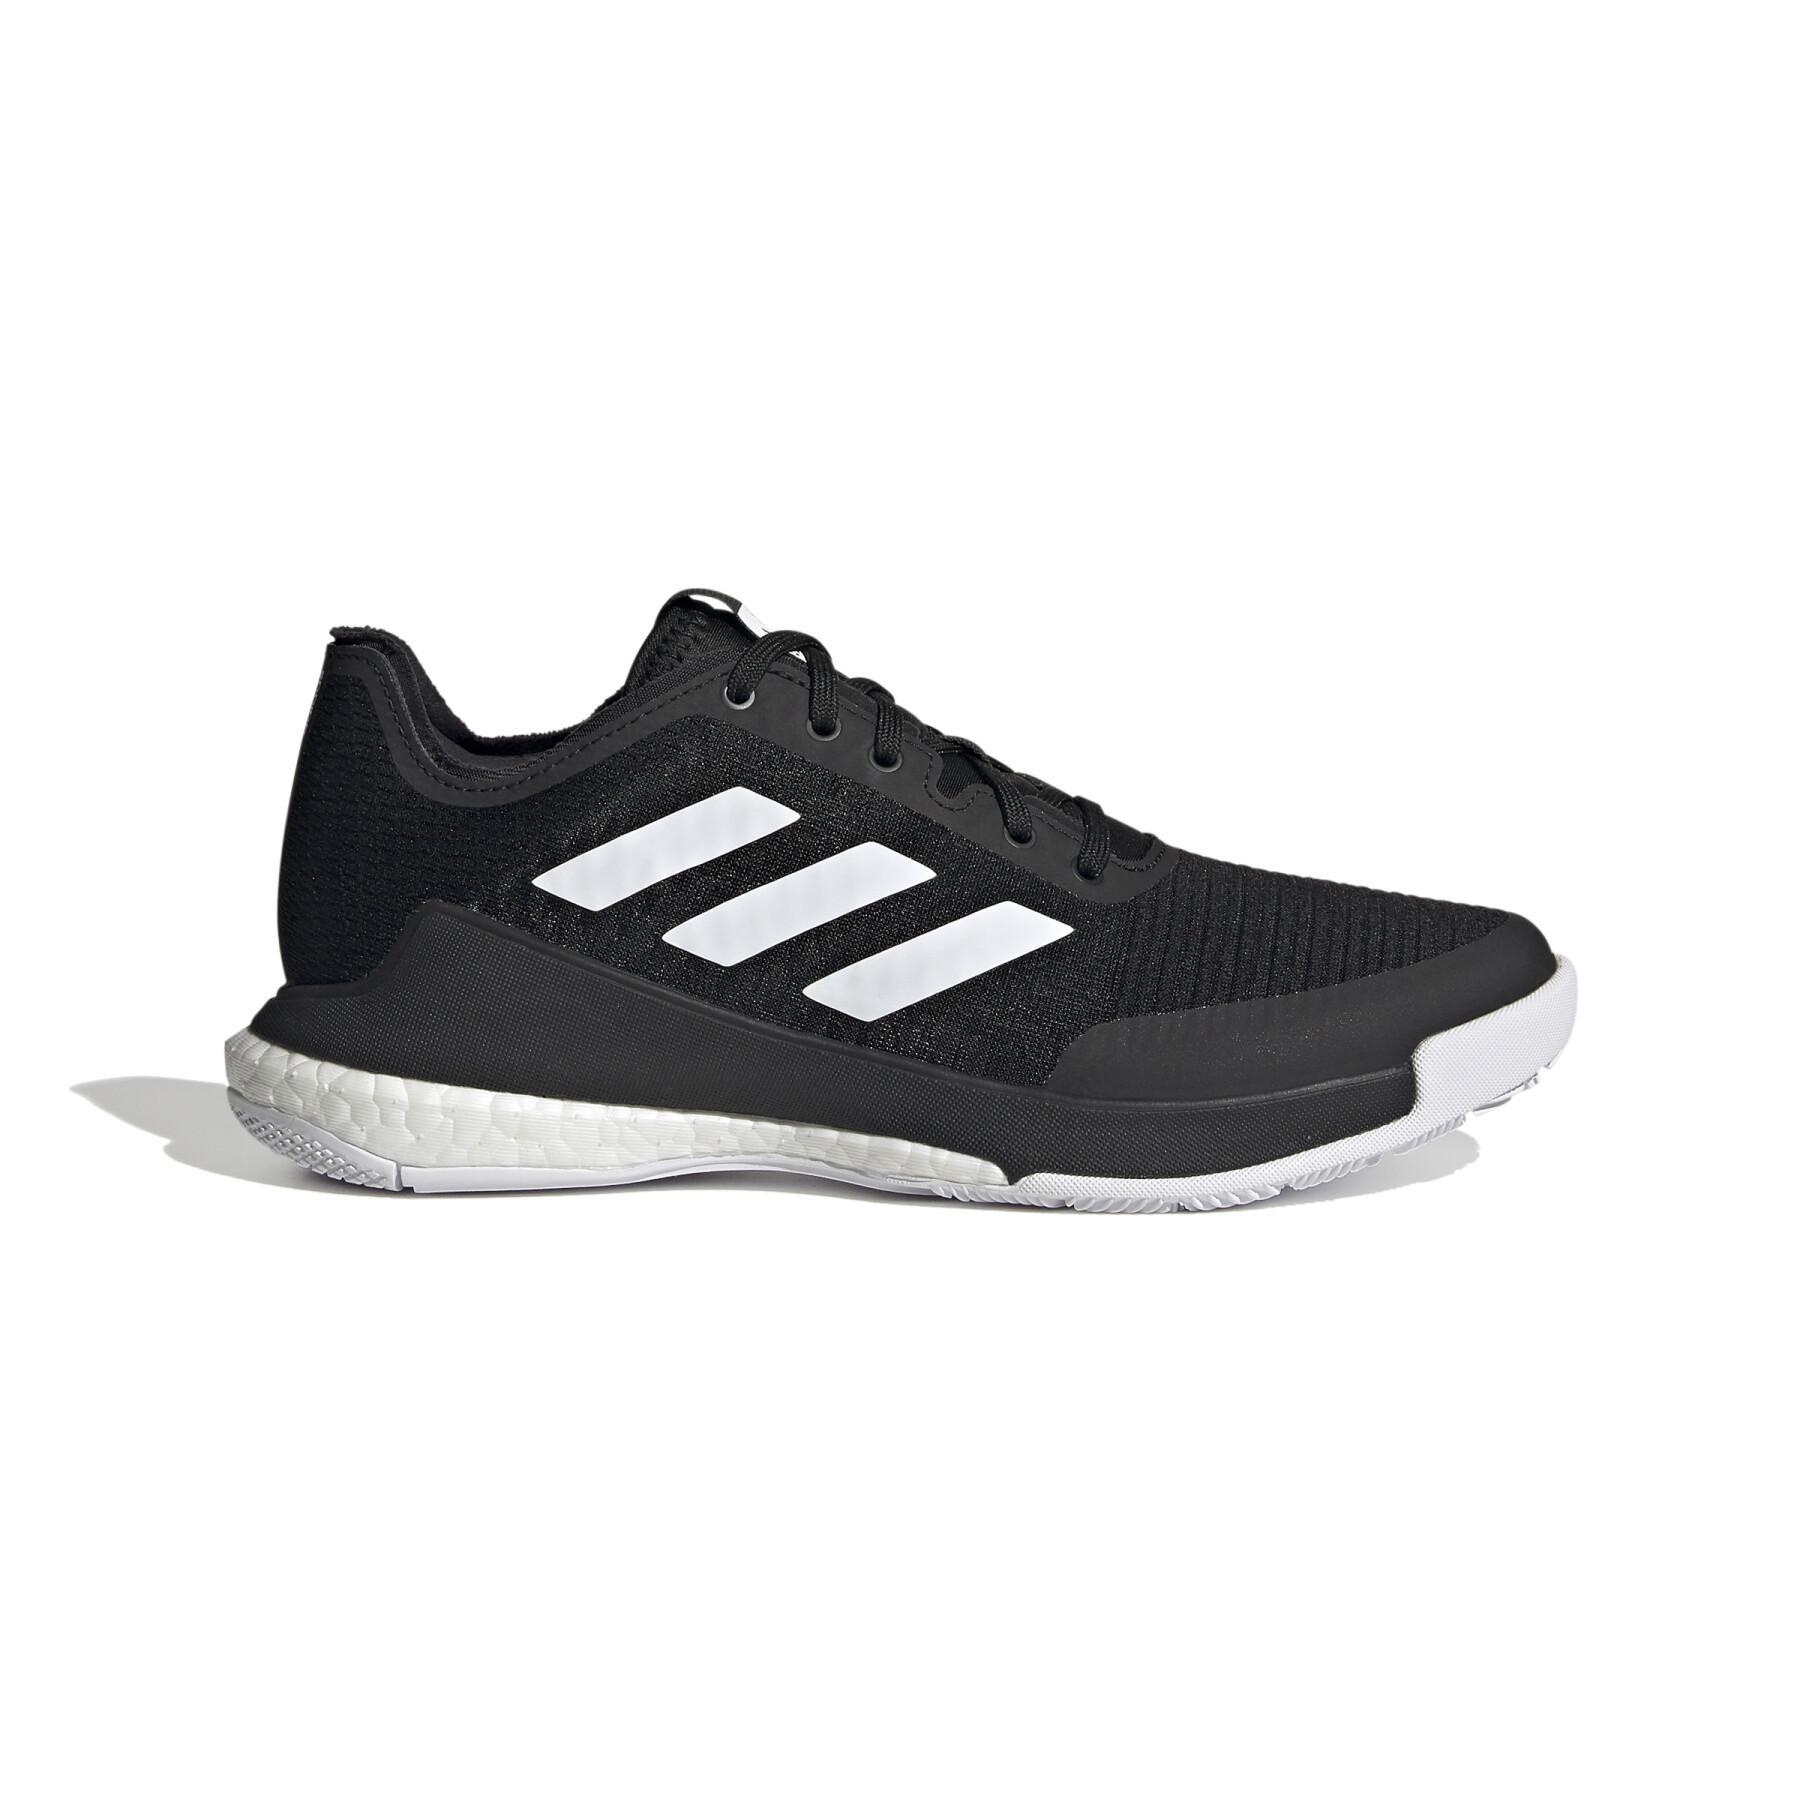 https://media.handball-store.es/catalog/product/cache/image/1800x/9df78eab33525d08d6e5fb8d27136e95/a/d/adidas_fy1638_1_footwear_photography_side_lateral_center_view_white_000.jpg